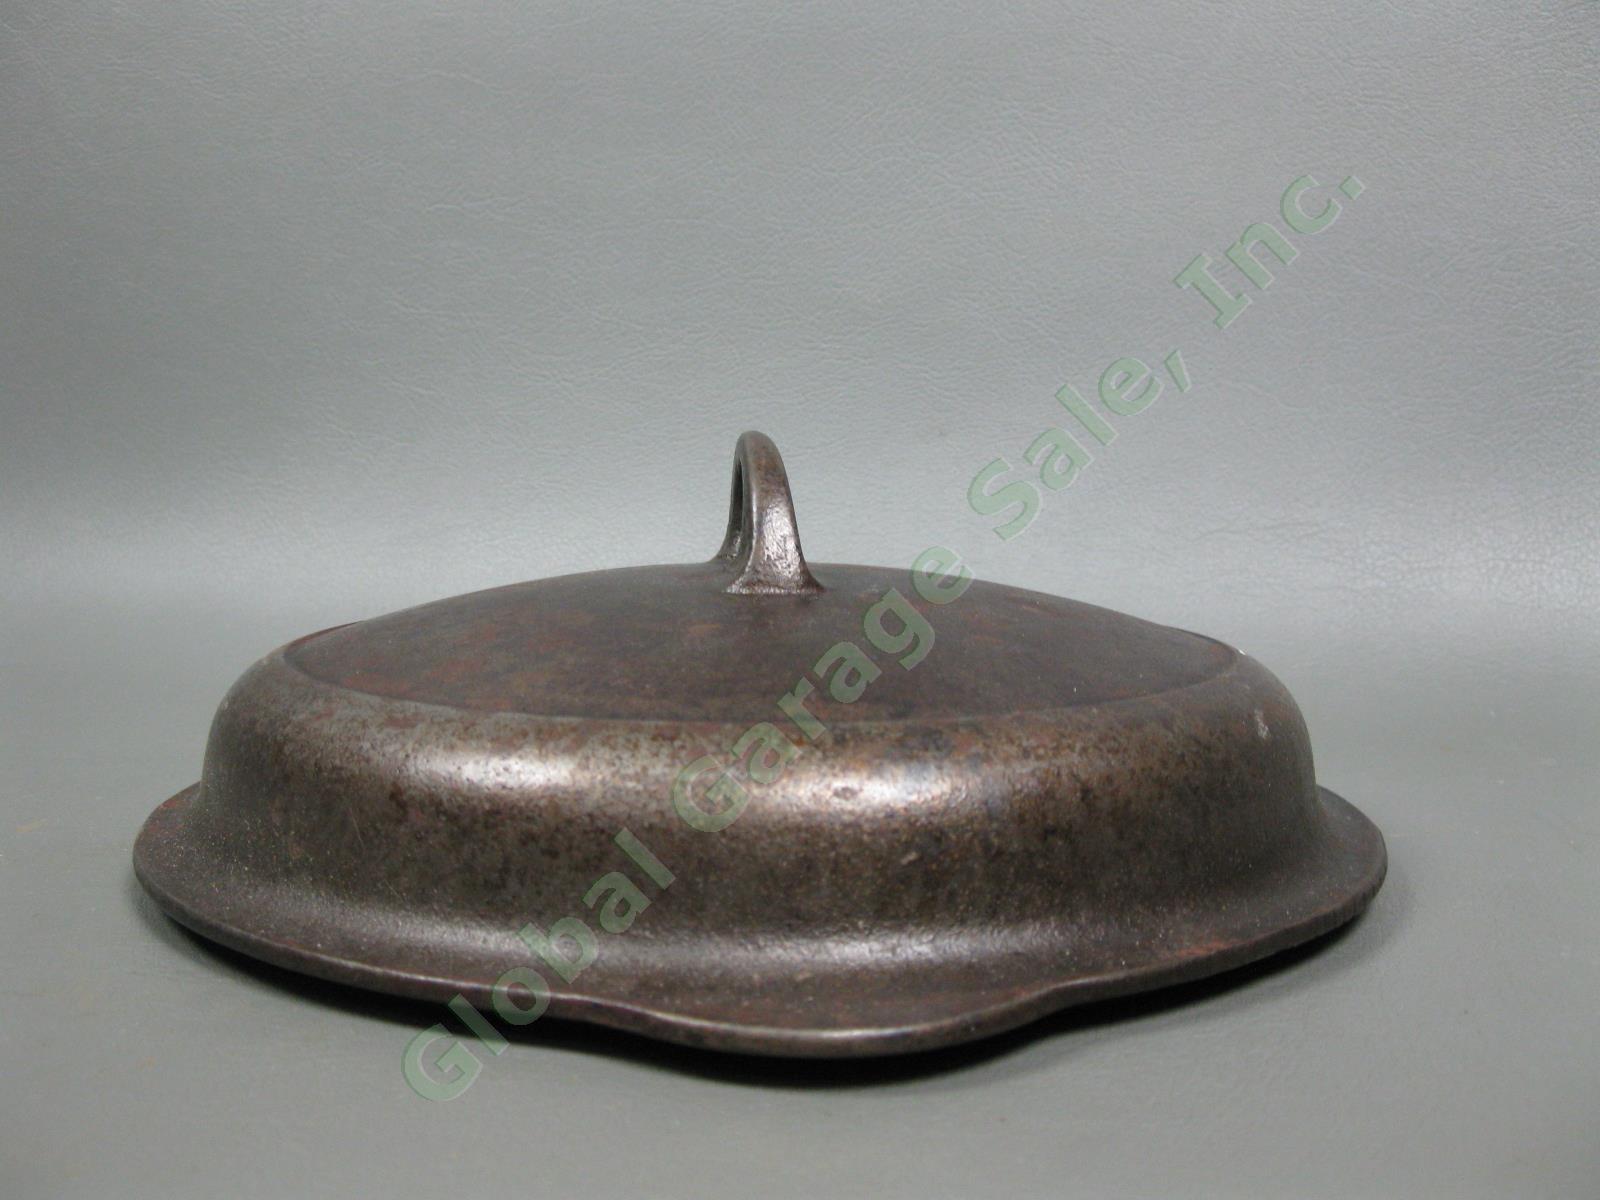 Vintage Griswold No-5 1095 Cast Iron Self-Basting Dutch Oven Lid Cover Cookware 5